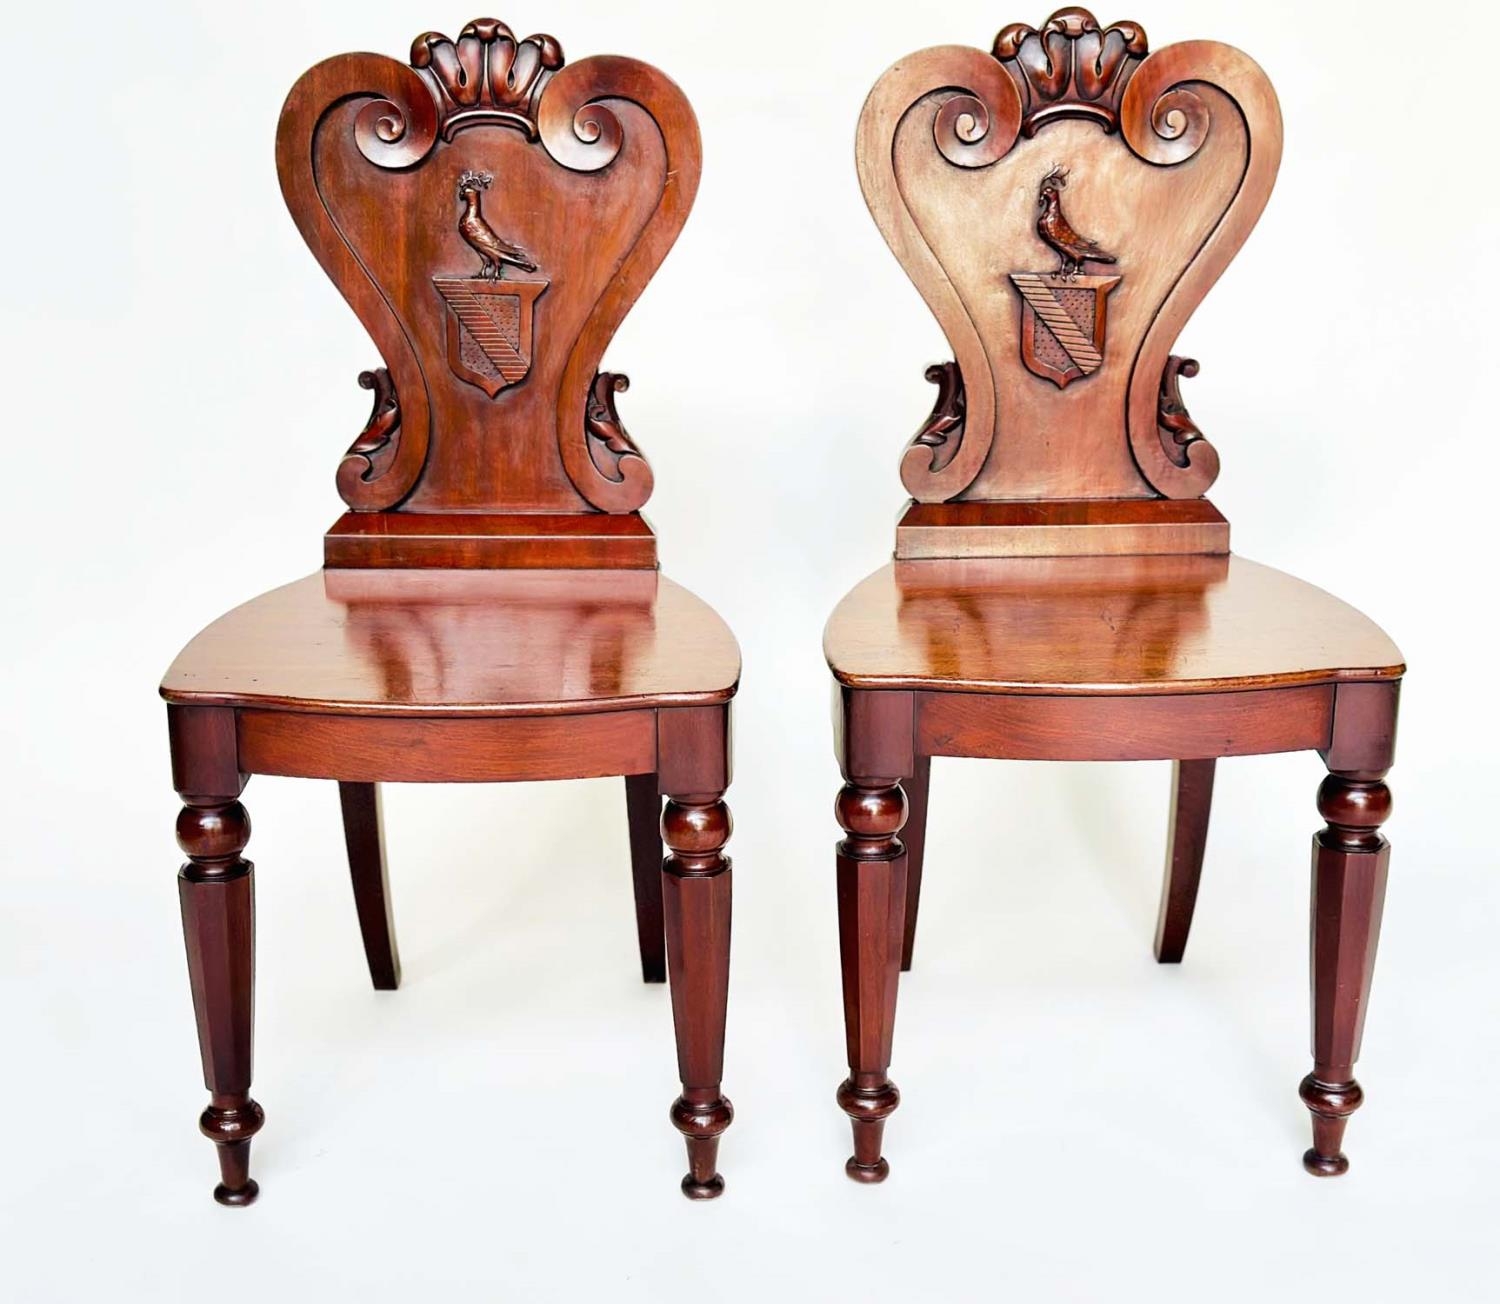 HALL CHAIRS, a pair, George III English Country House mahogany with carved armorial backs and